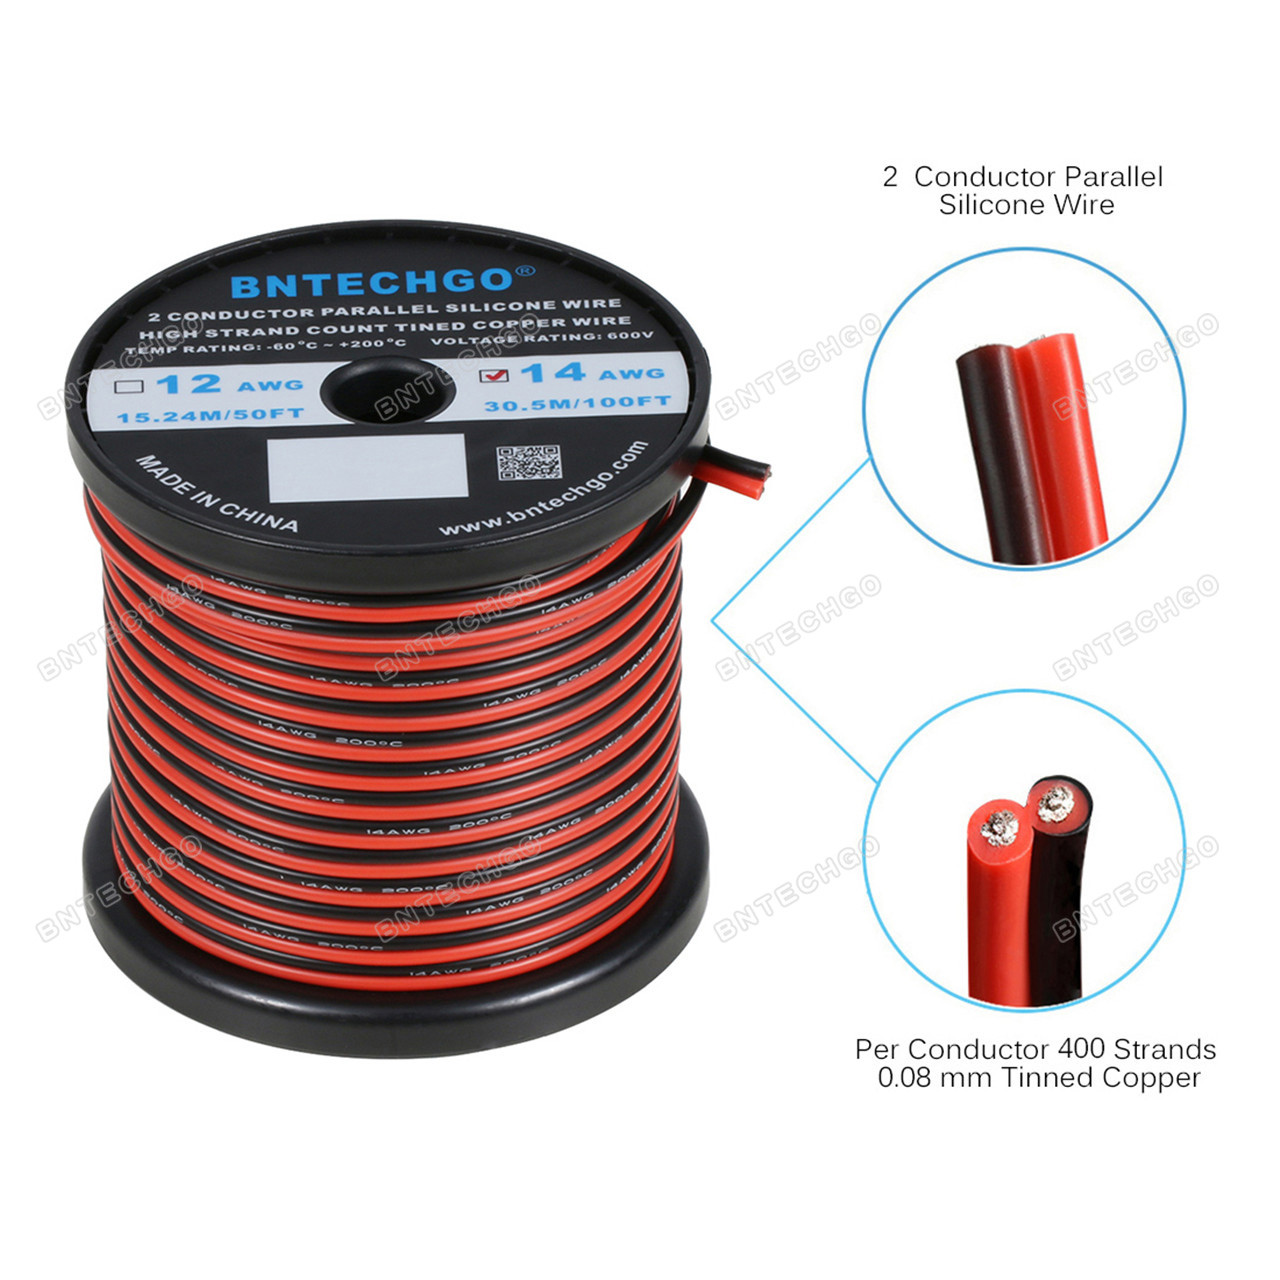 22 Gauge Silicone Insulated Wire PER METER